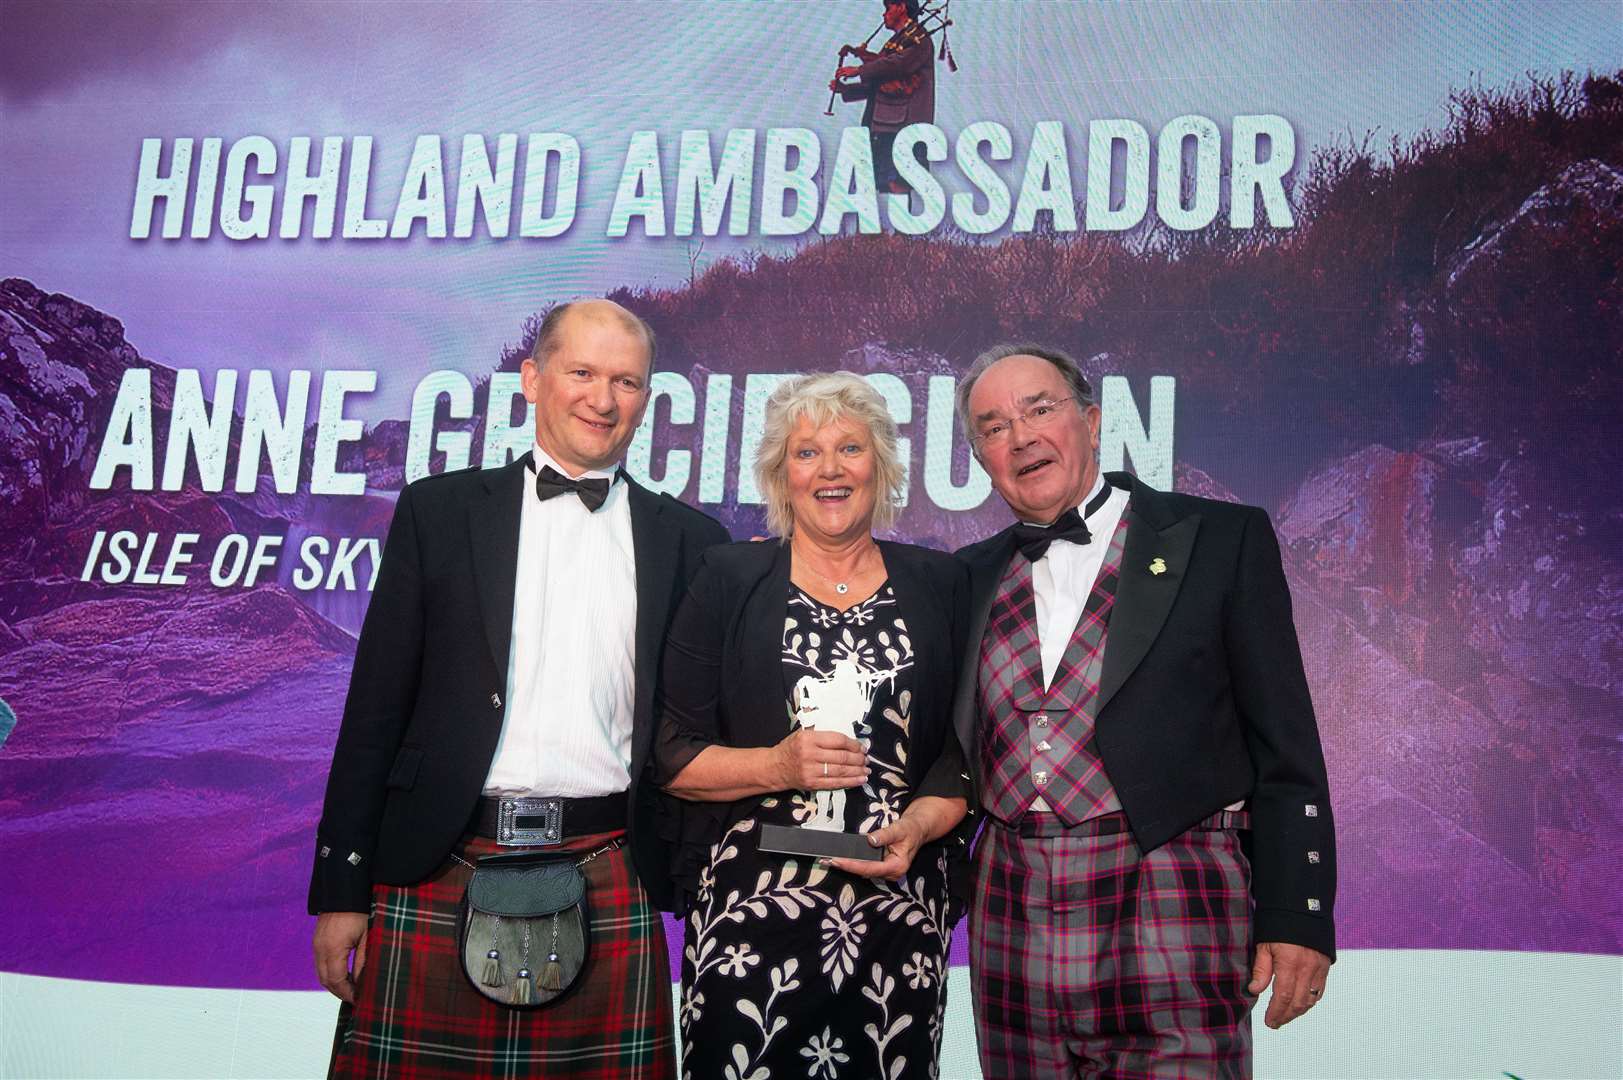 The 2019 Highland Ambassador was Anne Gracie Gunn. She received the award from sponsor, Mike Seaton, director of development, SSE Renewables and Laurence Young, HITA chairman. Picture: Callum Mackay